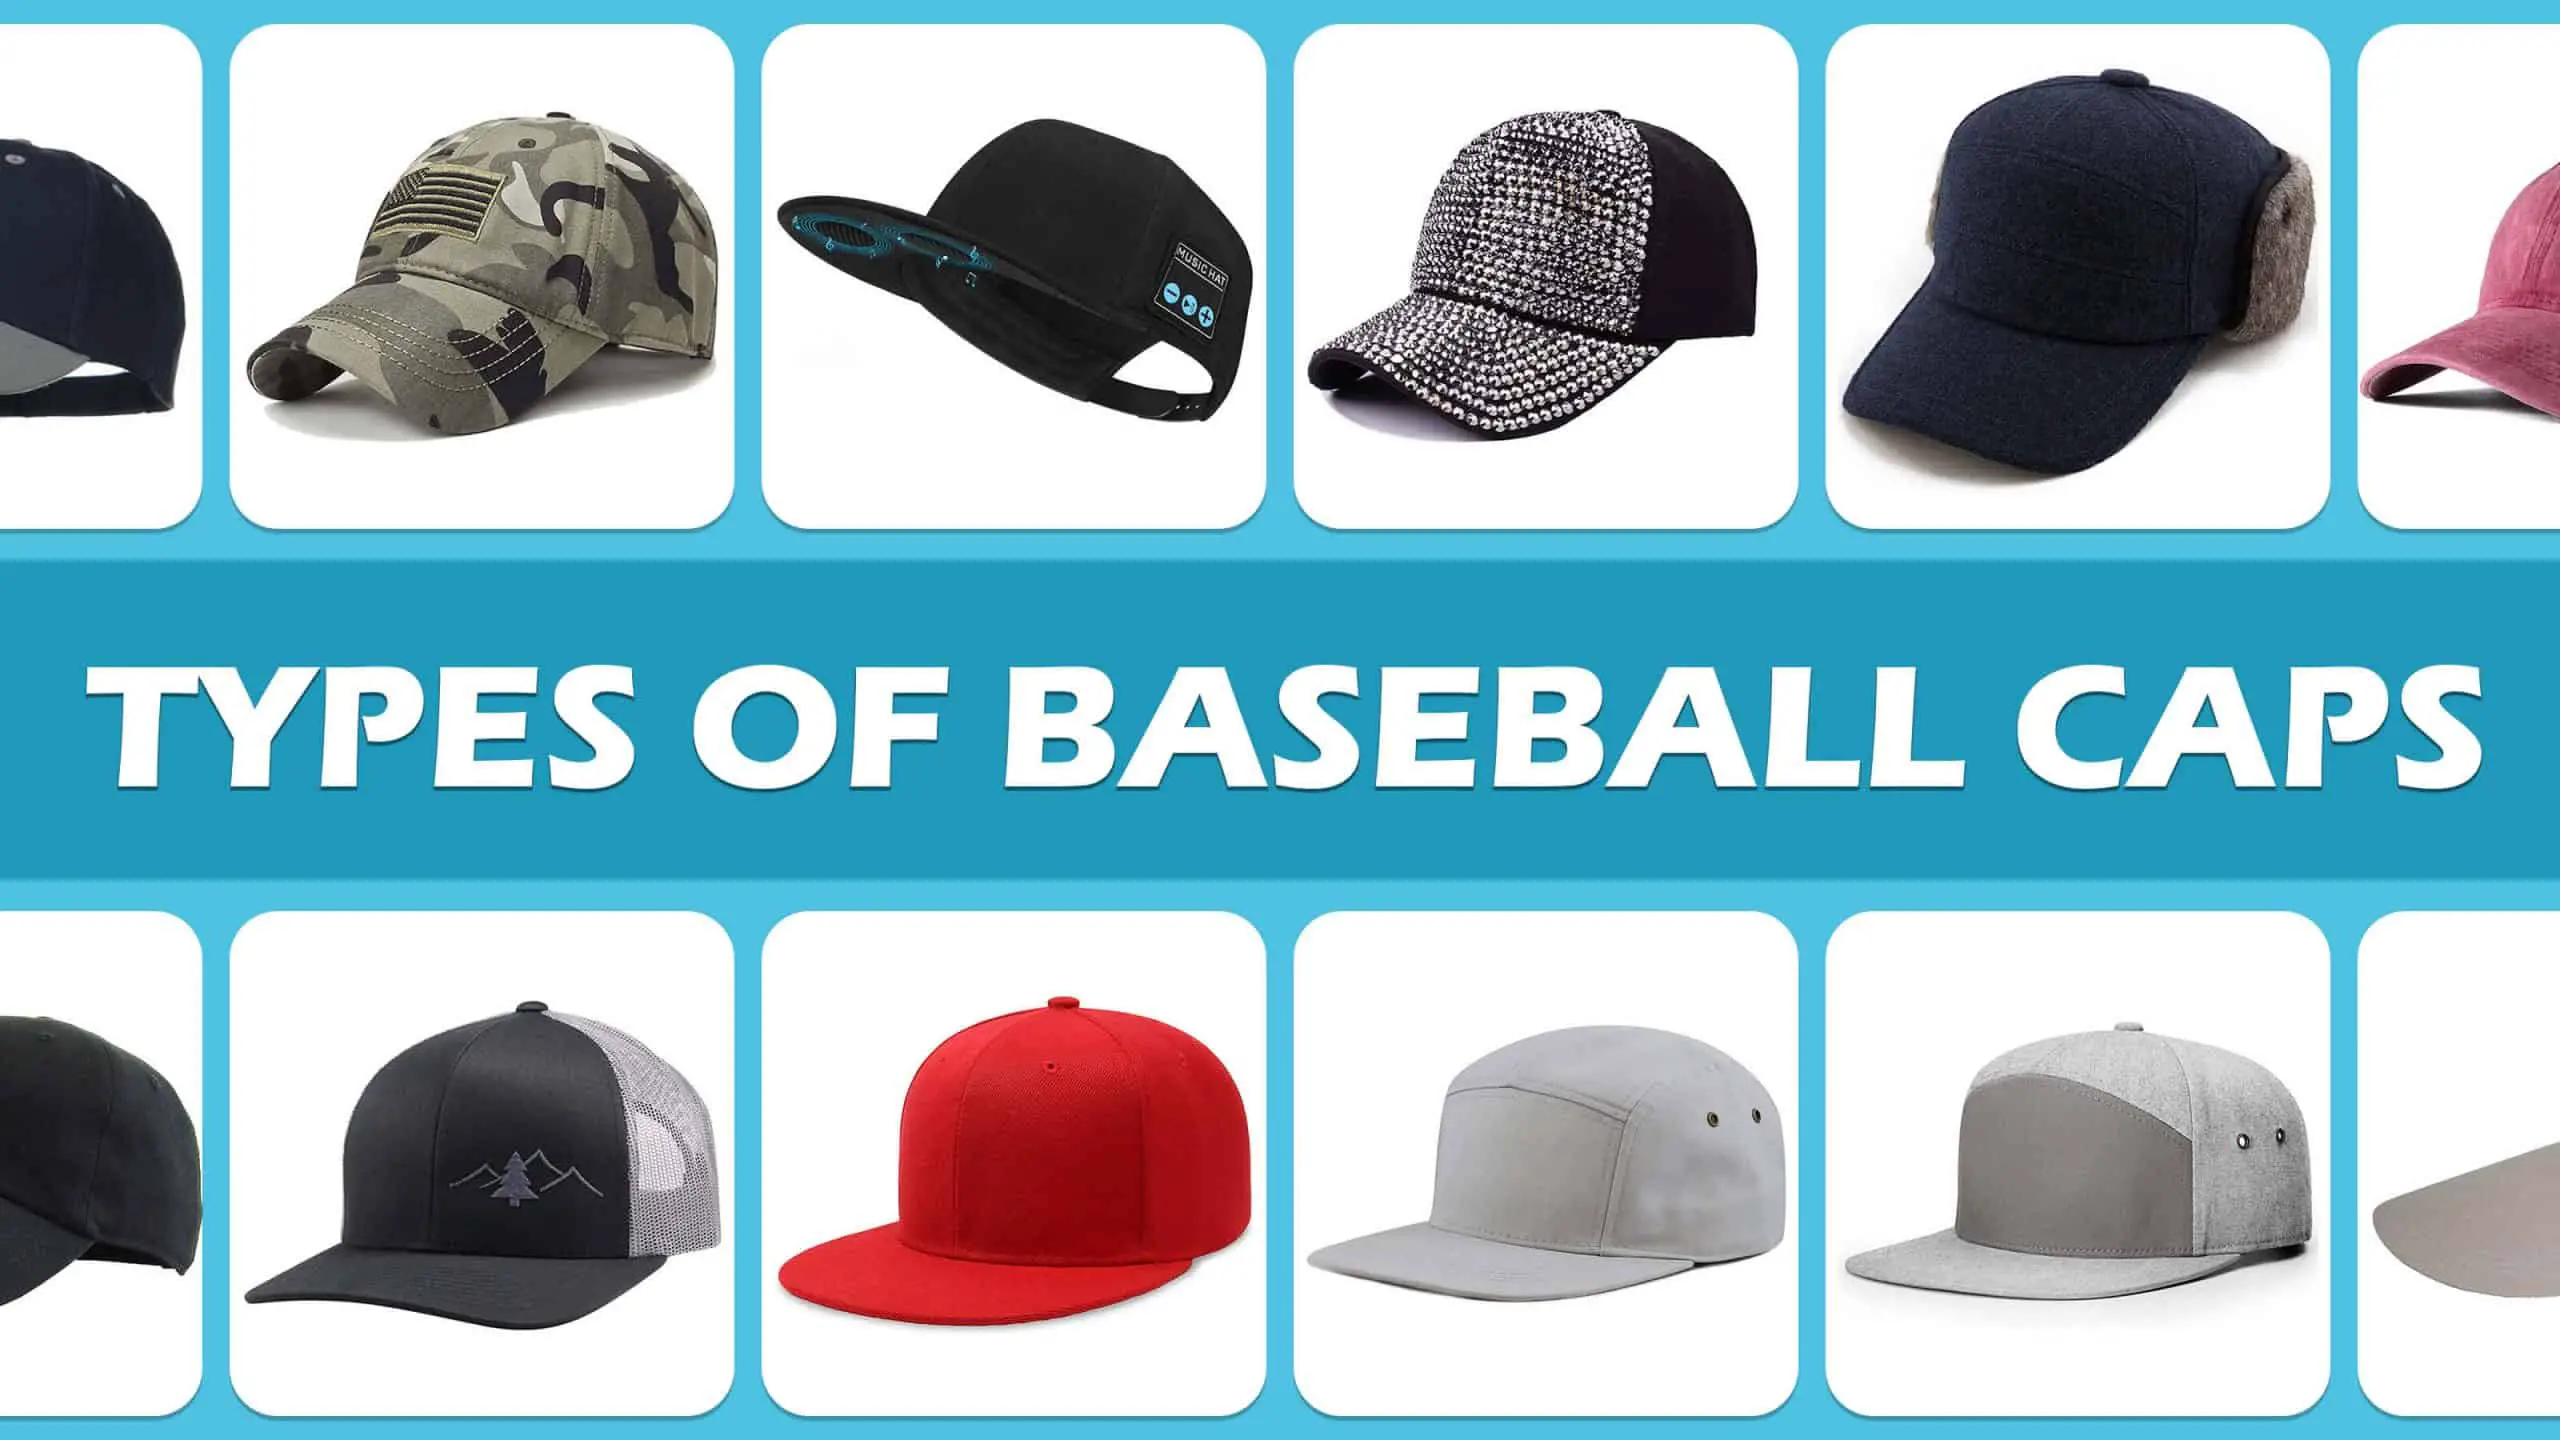 Types Of Baseball Caps And Hats